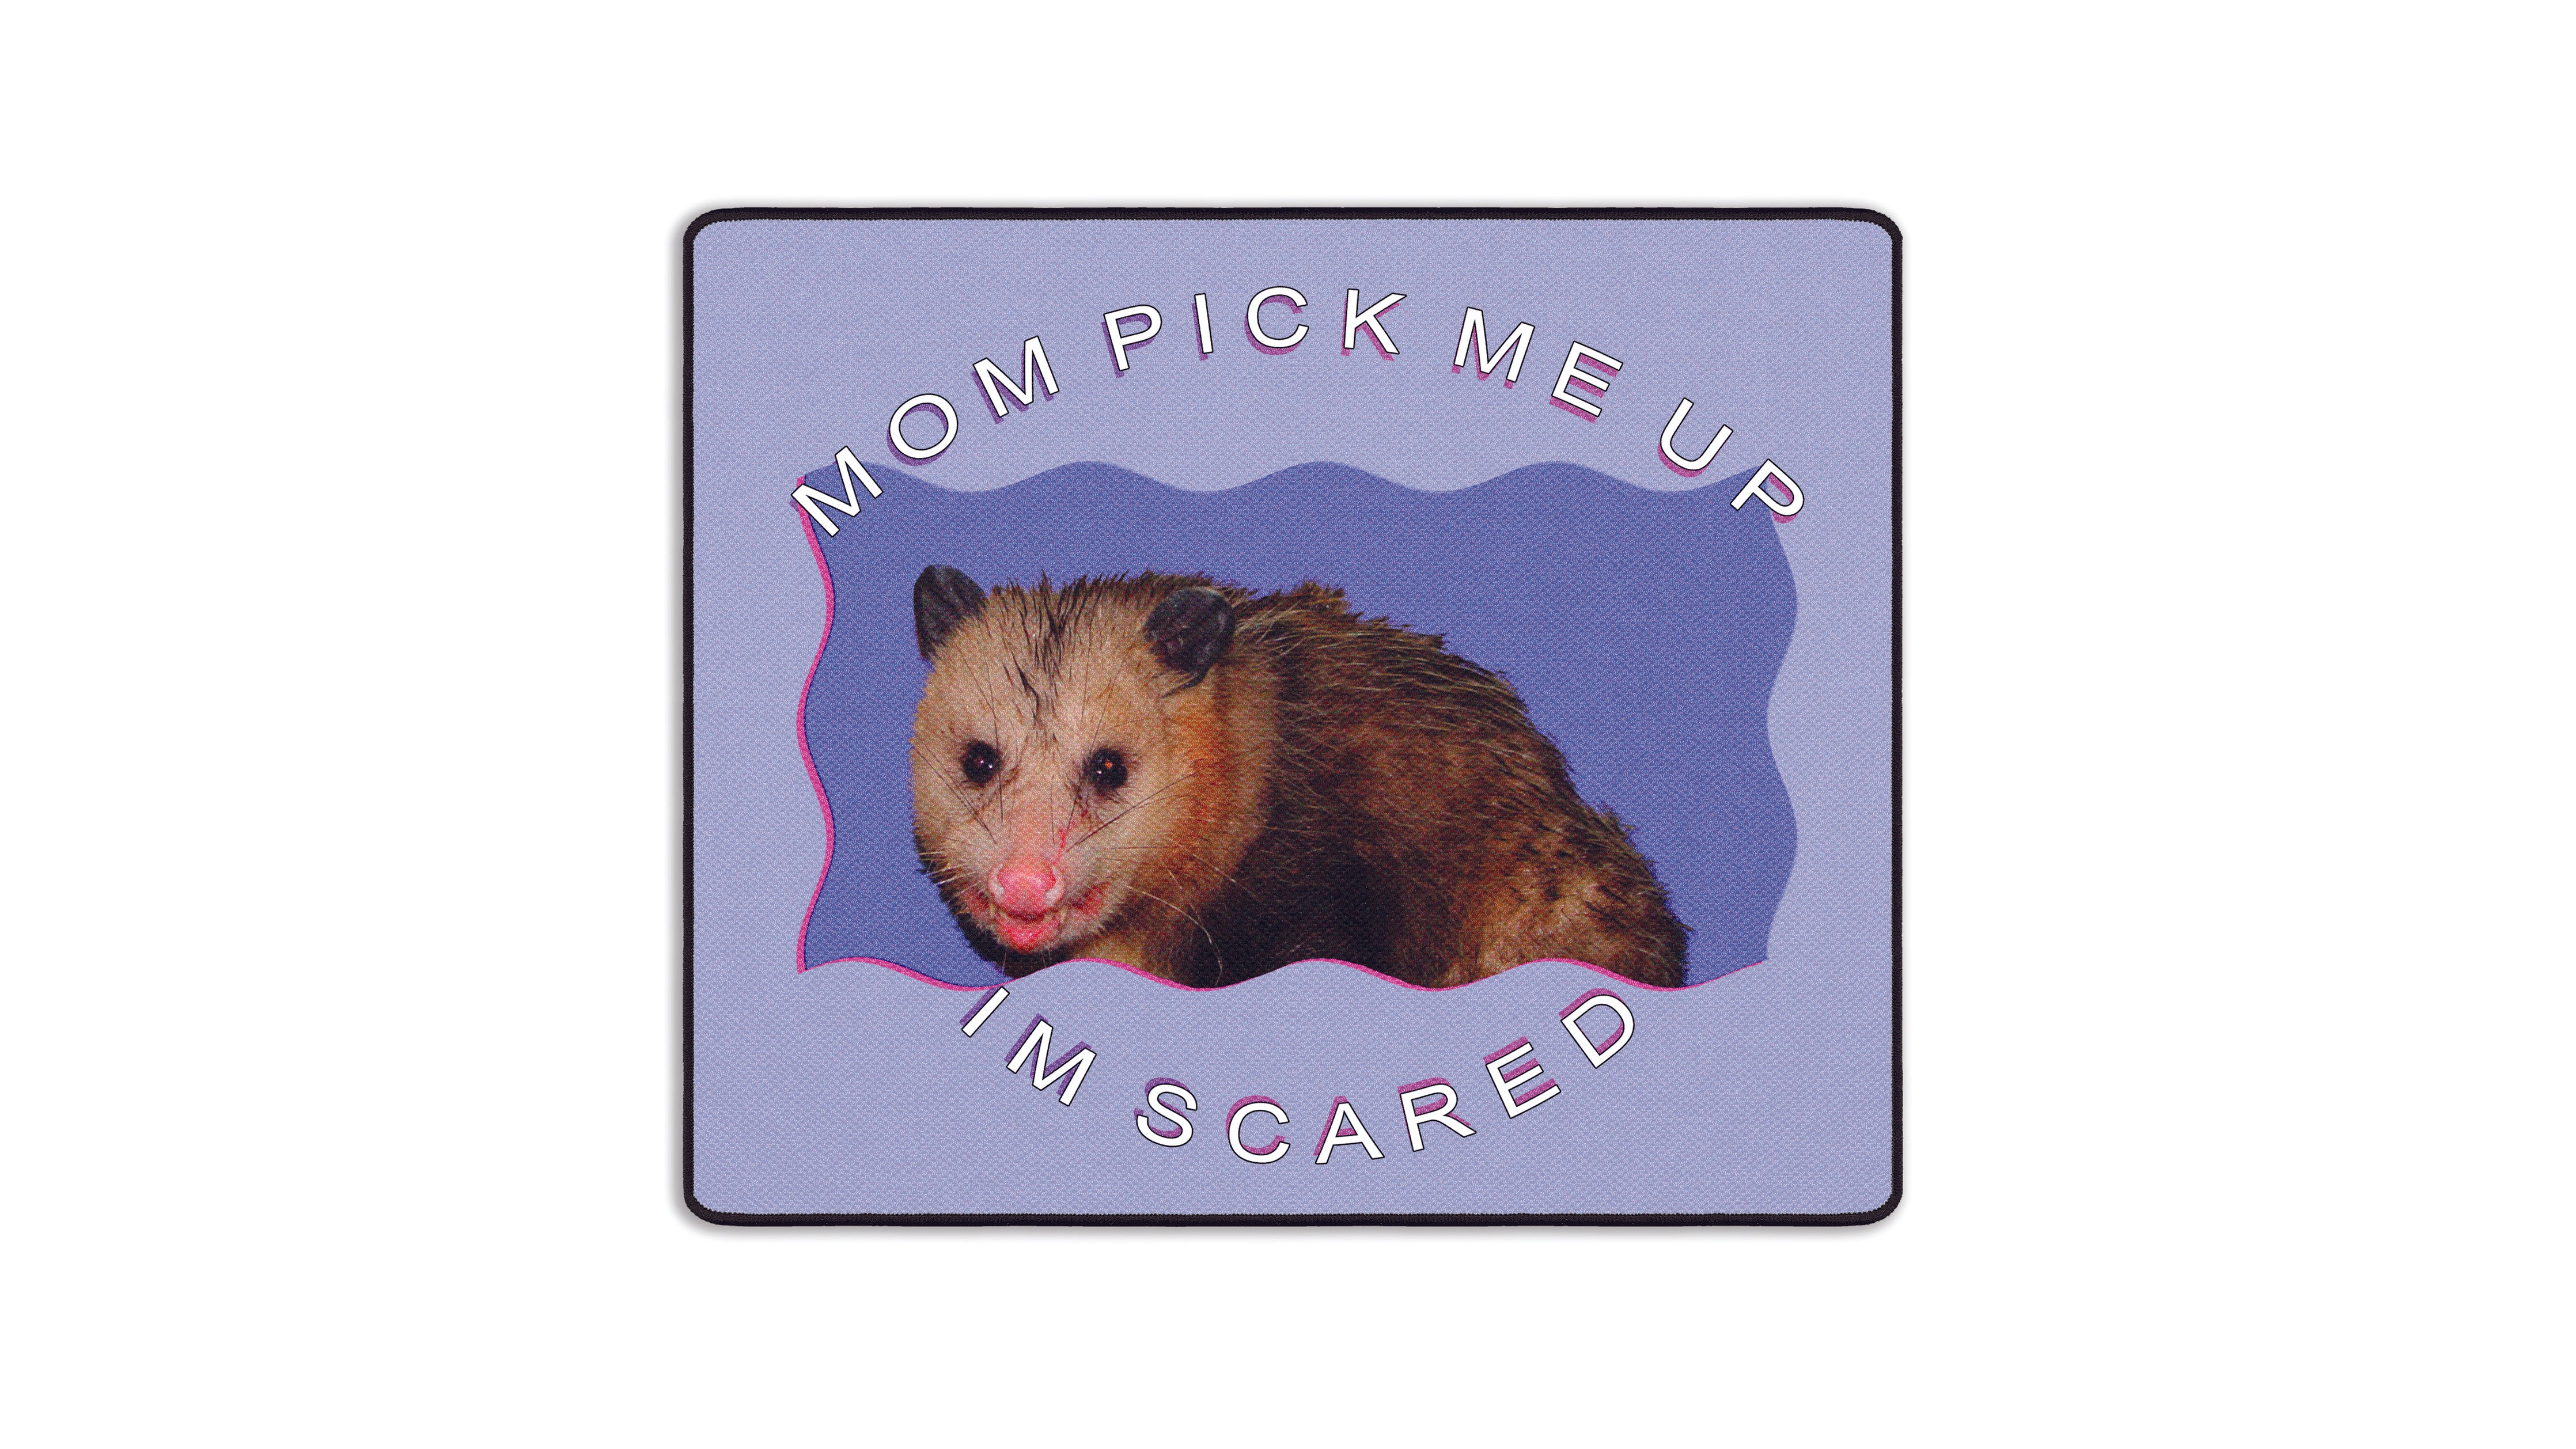 Pick Me Up, I'm Scared by Dogecore - The Mousepad Company